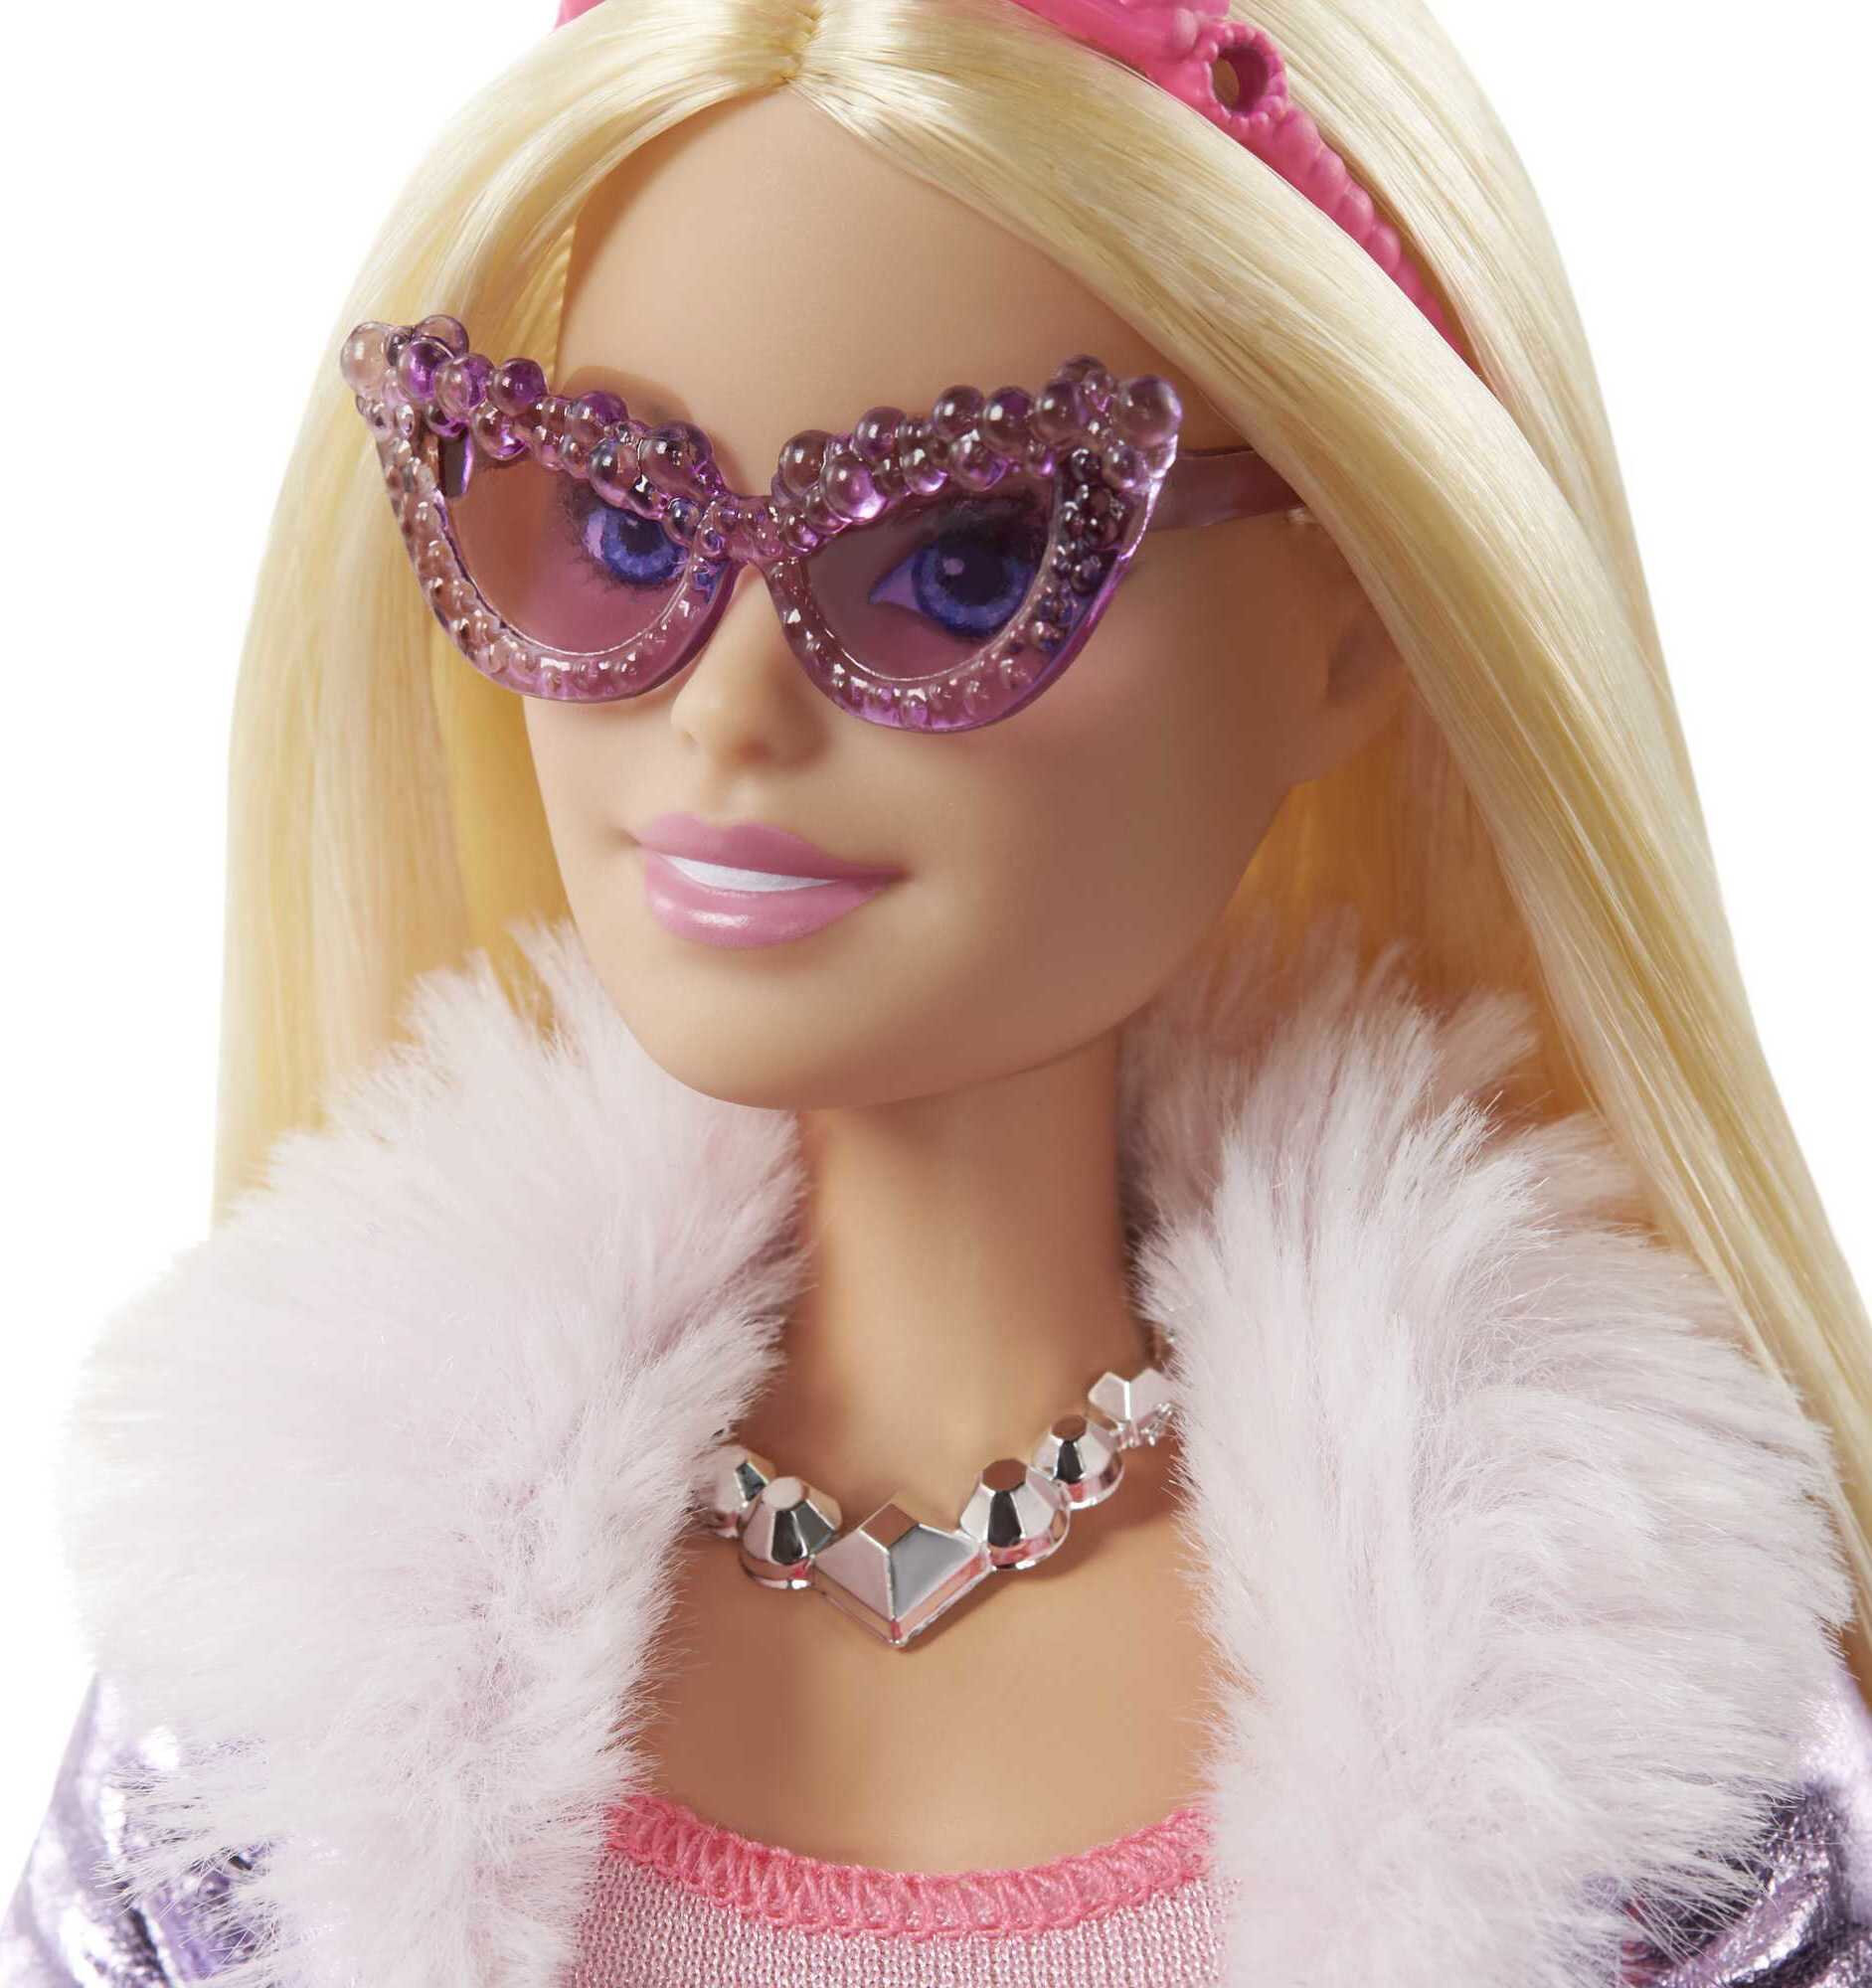 Barbie Dreamtopia Doll & Accessories, Blonde Doll with Star Skirt, Pet Puppy & Fashion Accessories, 3 to 7 Years - image 5 of 7